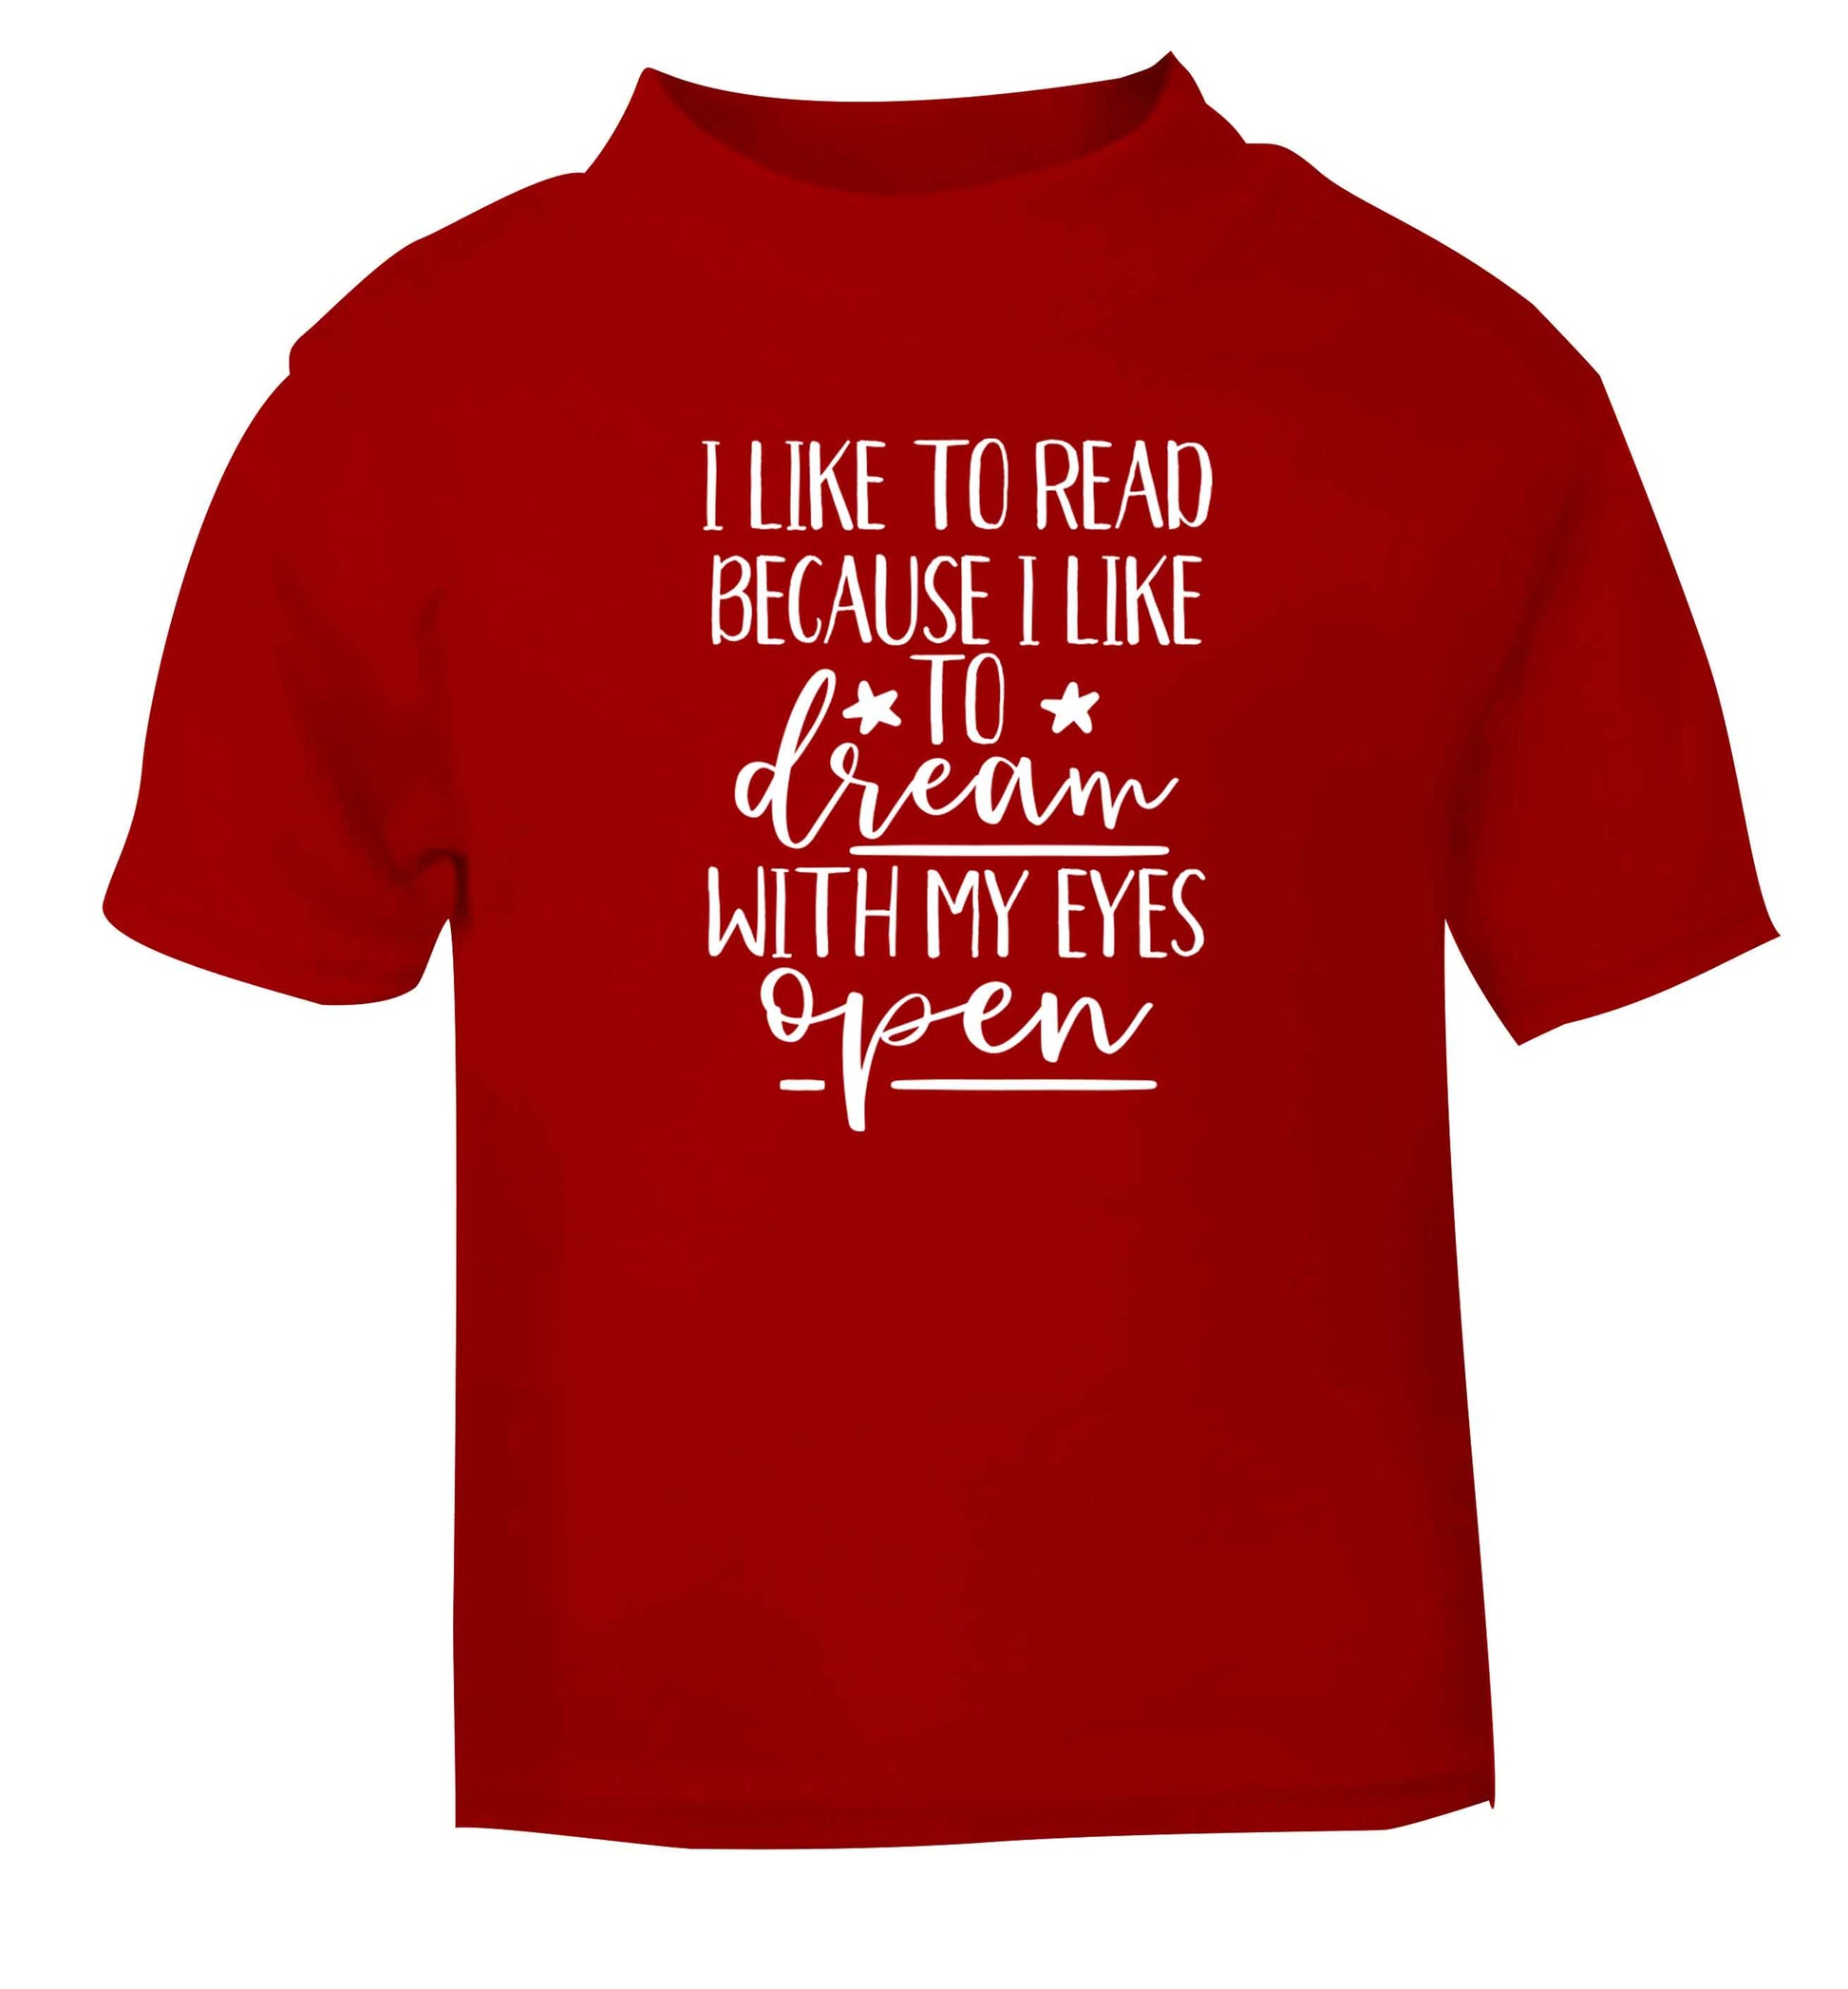 I like to read because I like to dream with my eyes open red Baby Toddler Tshirt 2 Years